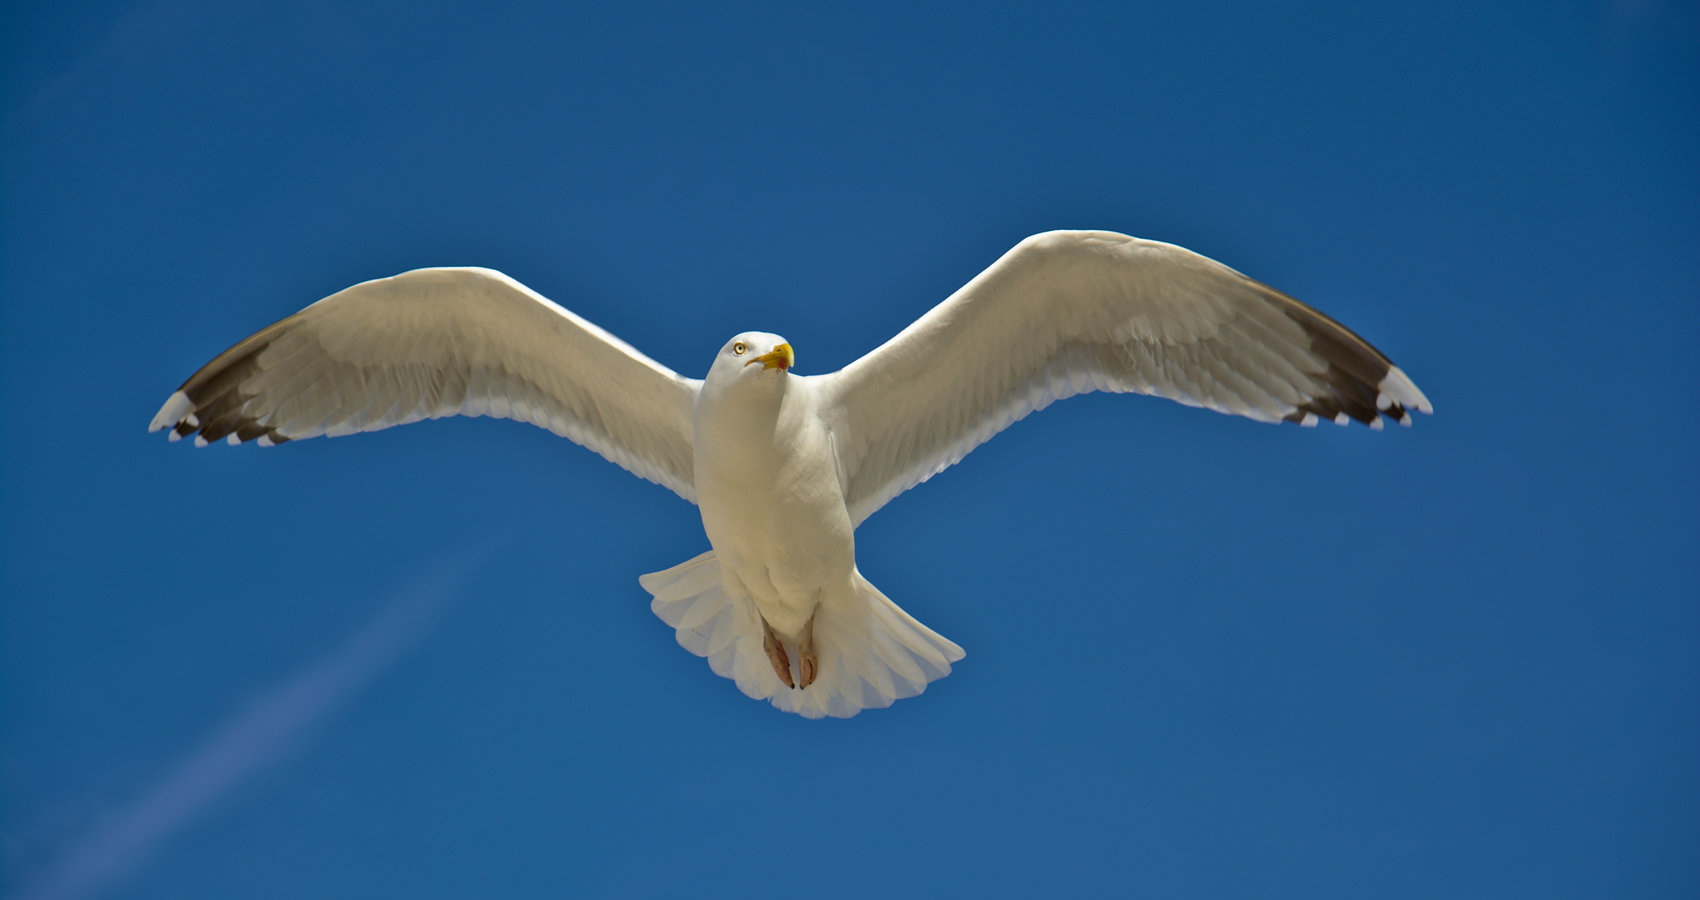 The Seagull, story by Patricia Furstenberg at Spillwords.com